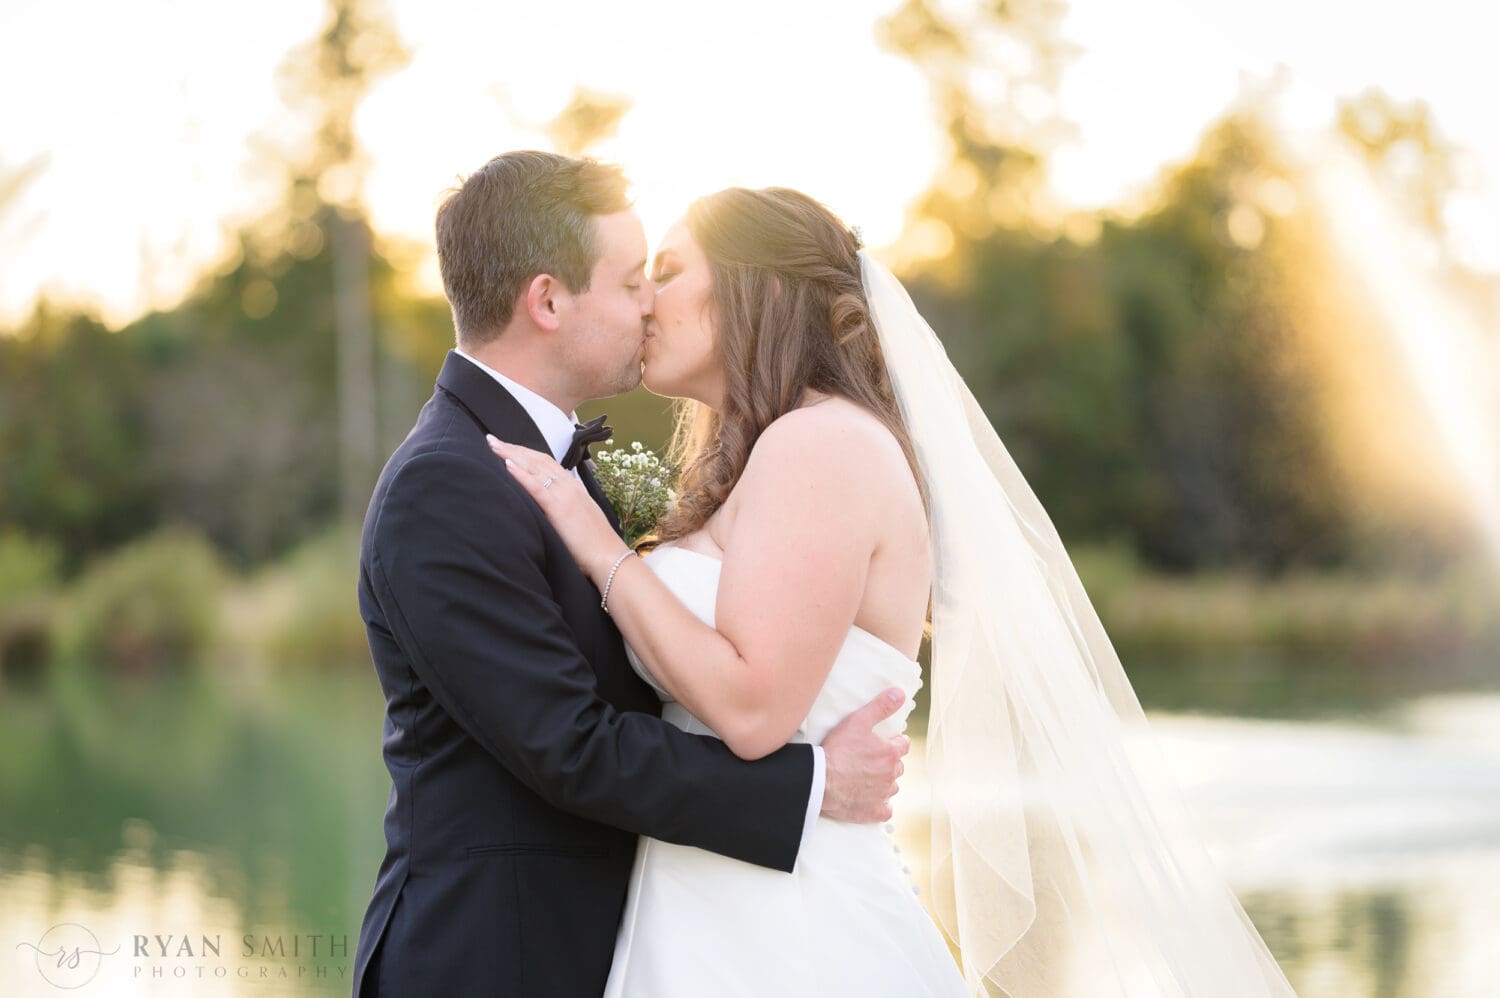 Kiss backlit by the sun - The Venue at White Oaks Farm